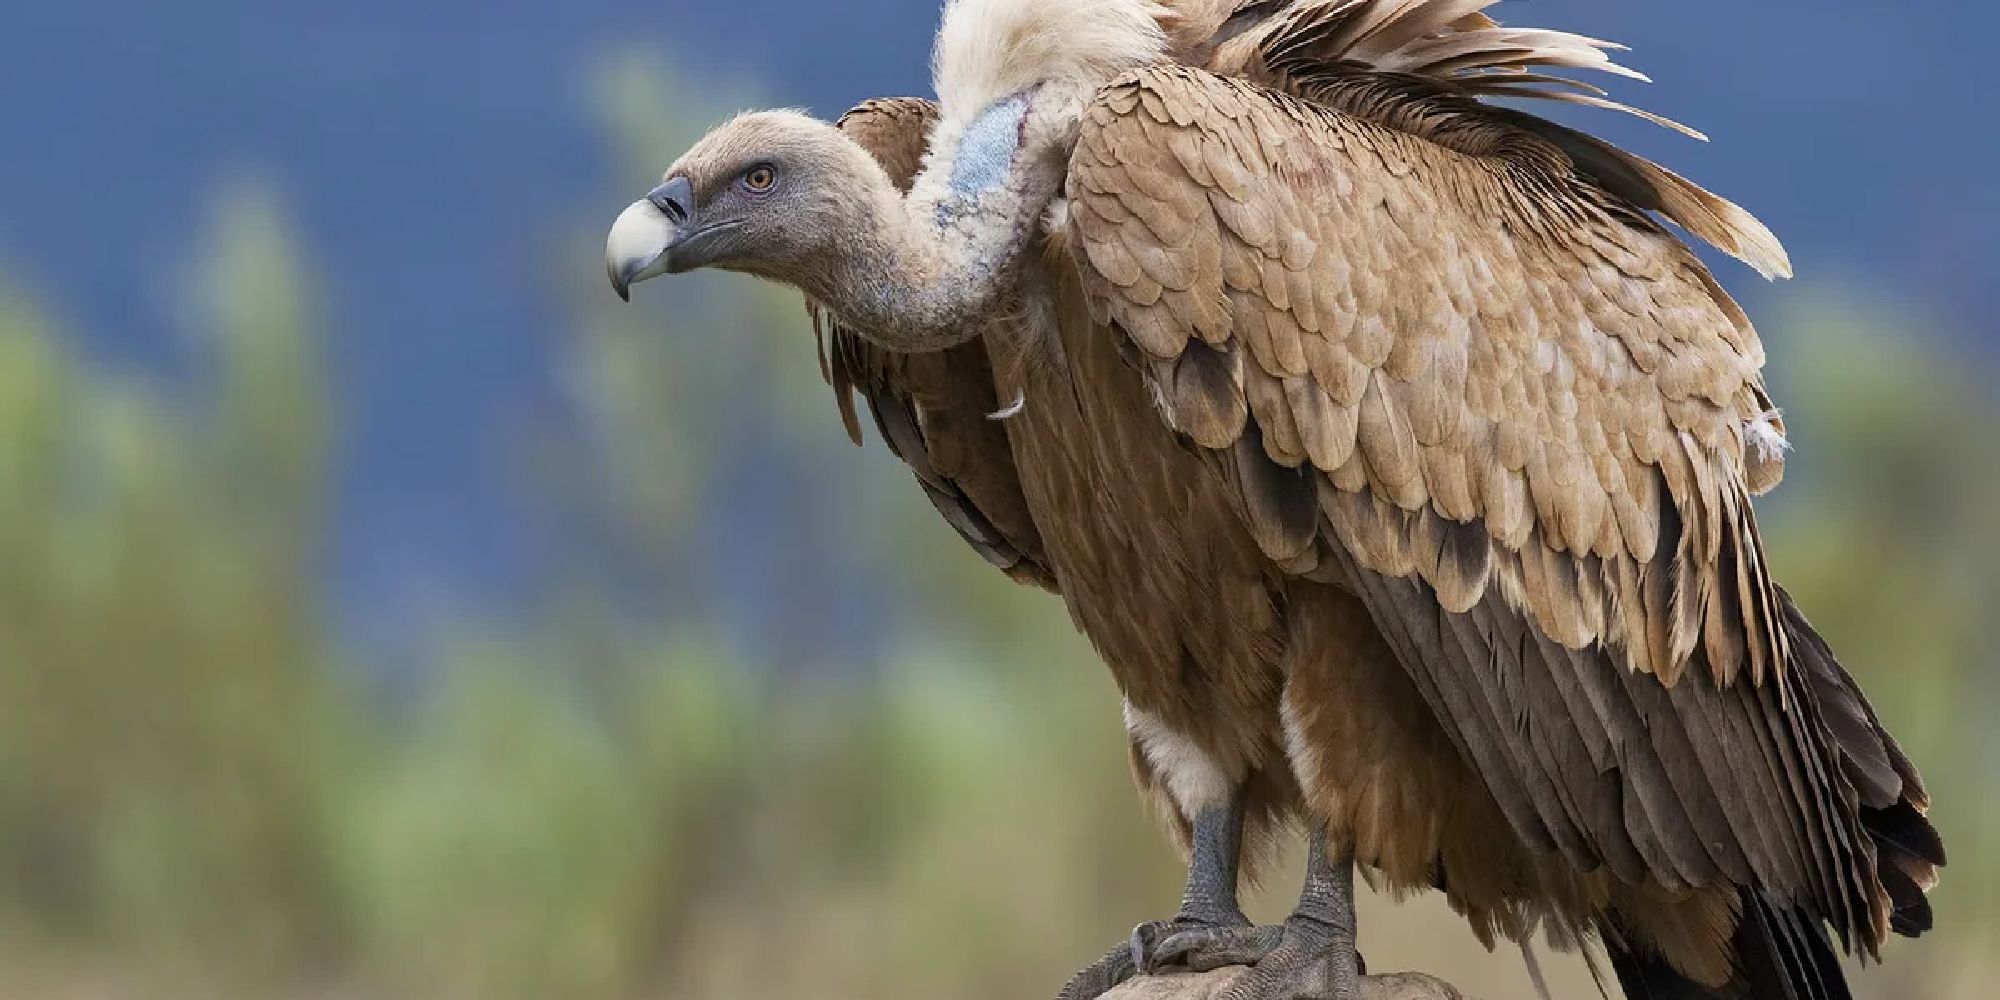 A griffon vulture perched on a rock in a field